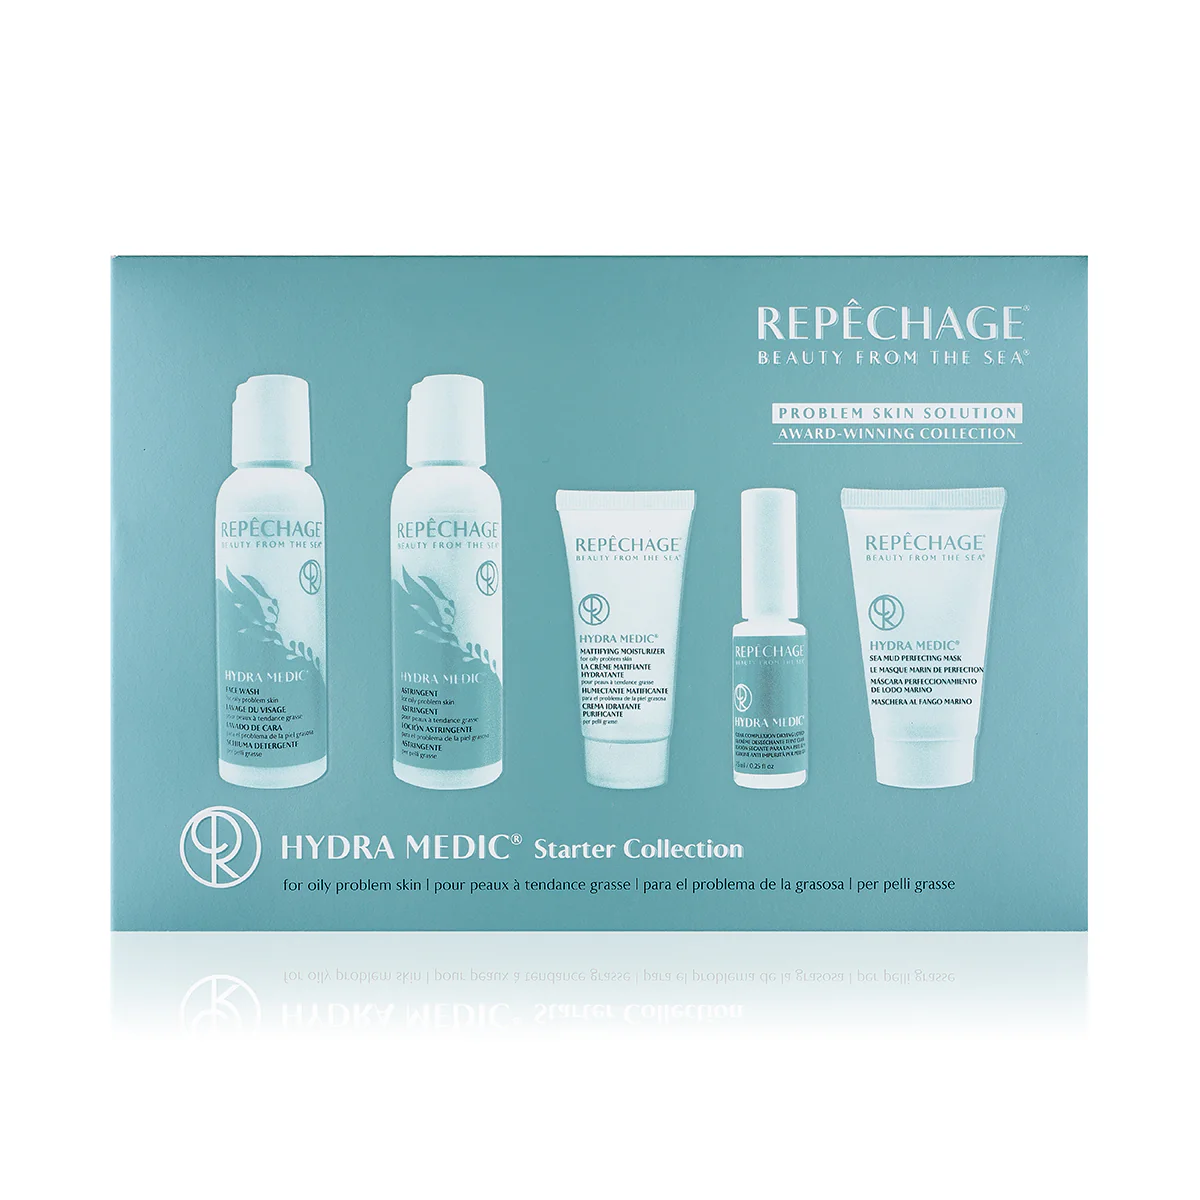 HYDRA MEDIC® STARTER COLLECTION FOR OILY, PROBLEM SKIN